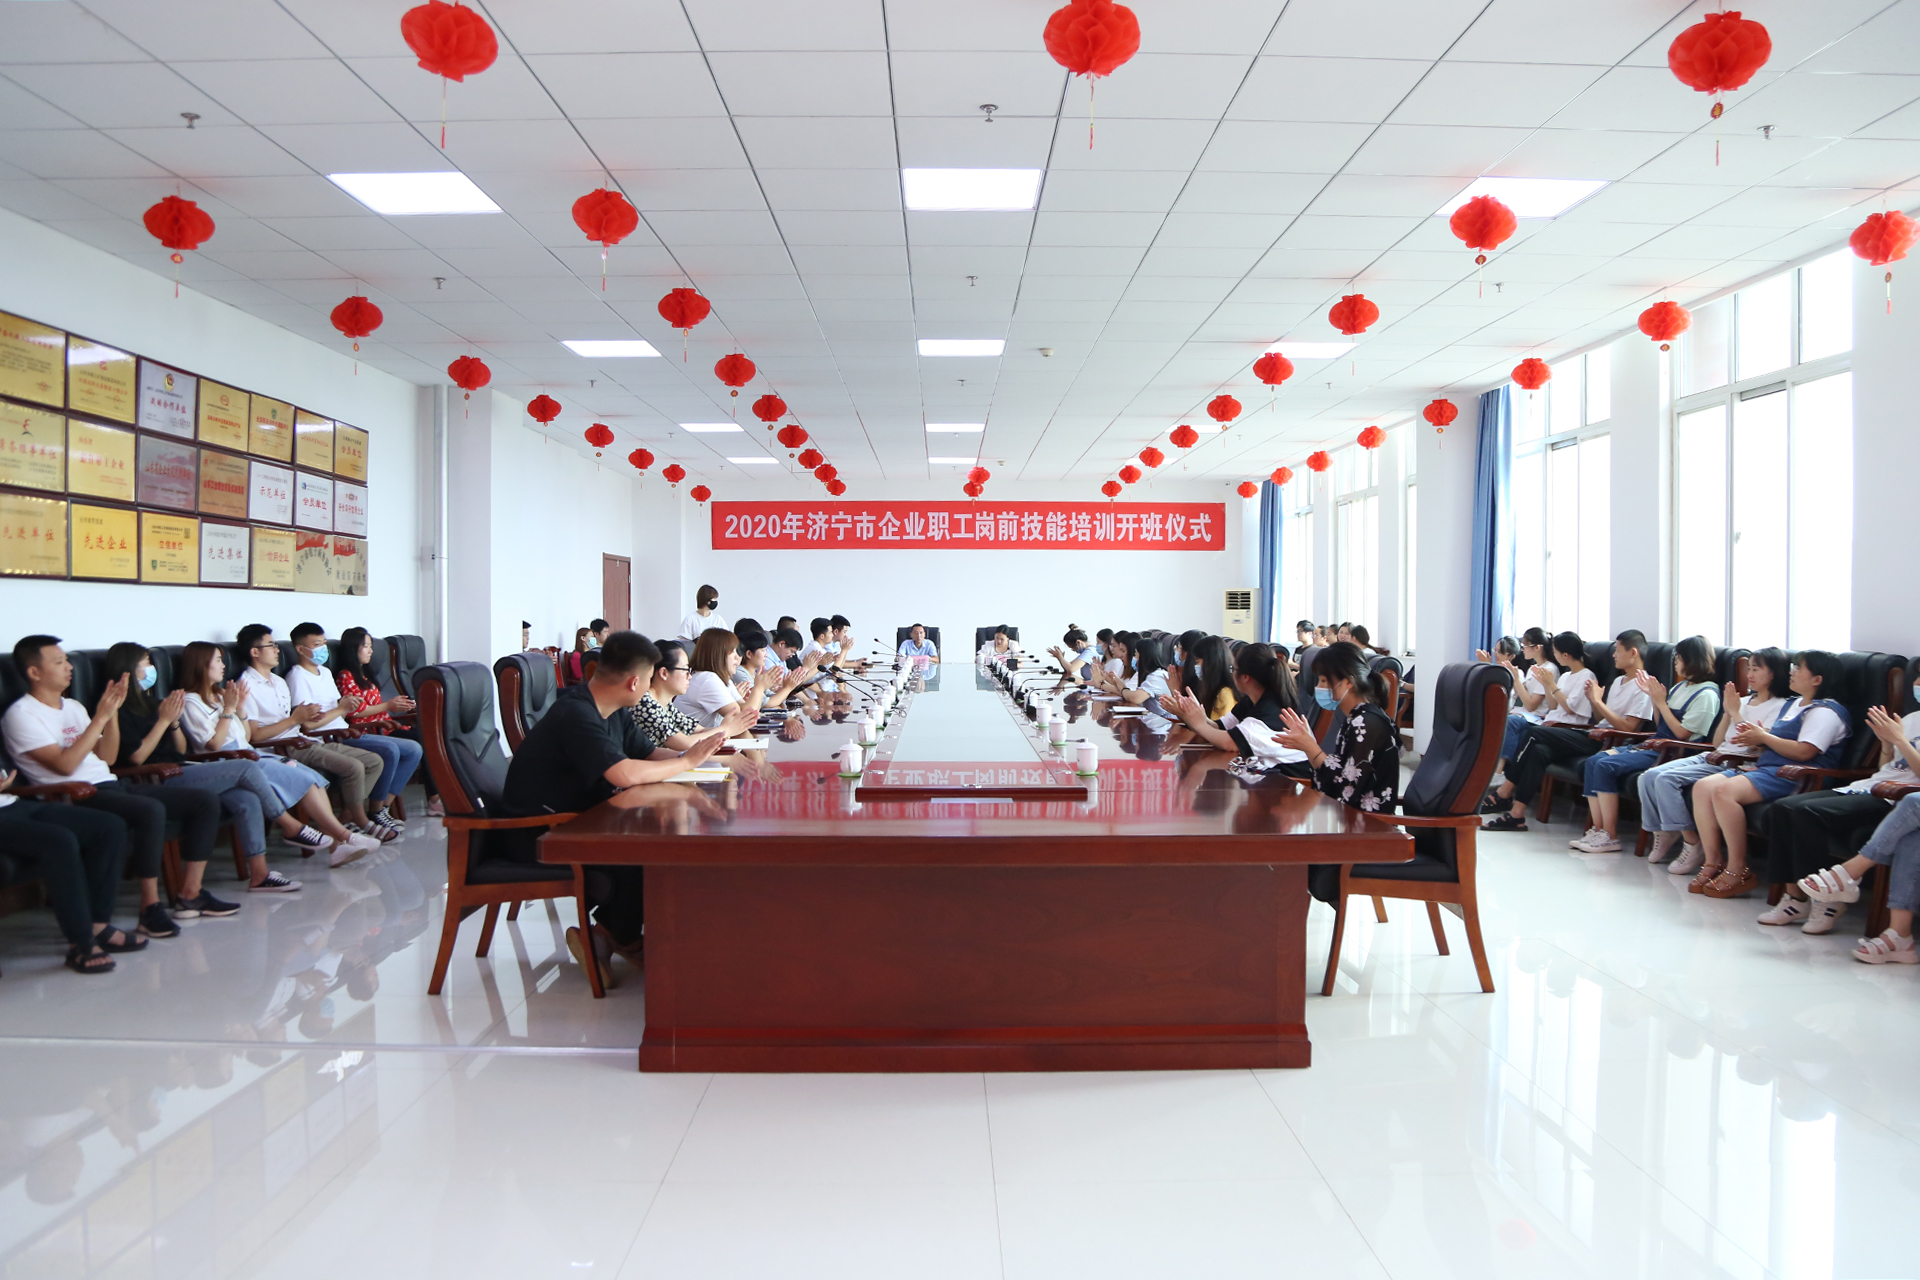 The Opening Ceremony Of The First Batch Of Pre-job Skills Training For Employees Of Jining City Industry And Information Business Vocational Training College In 2020 Is Held